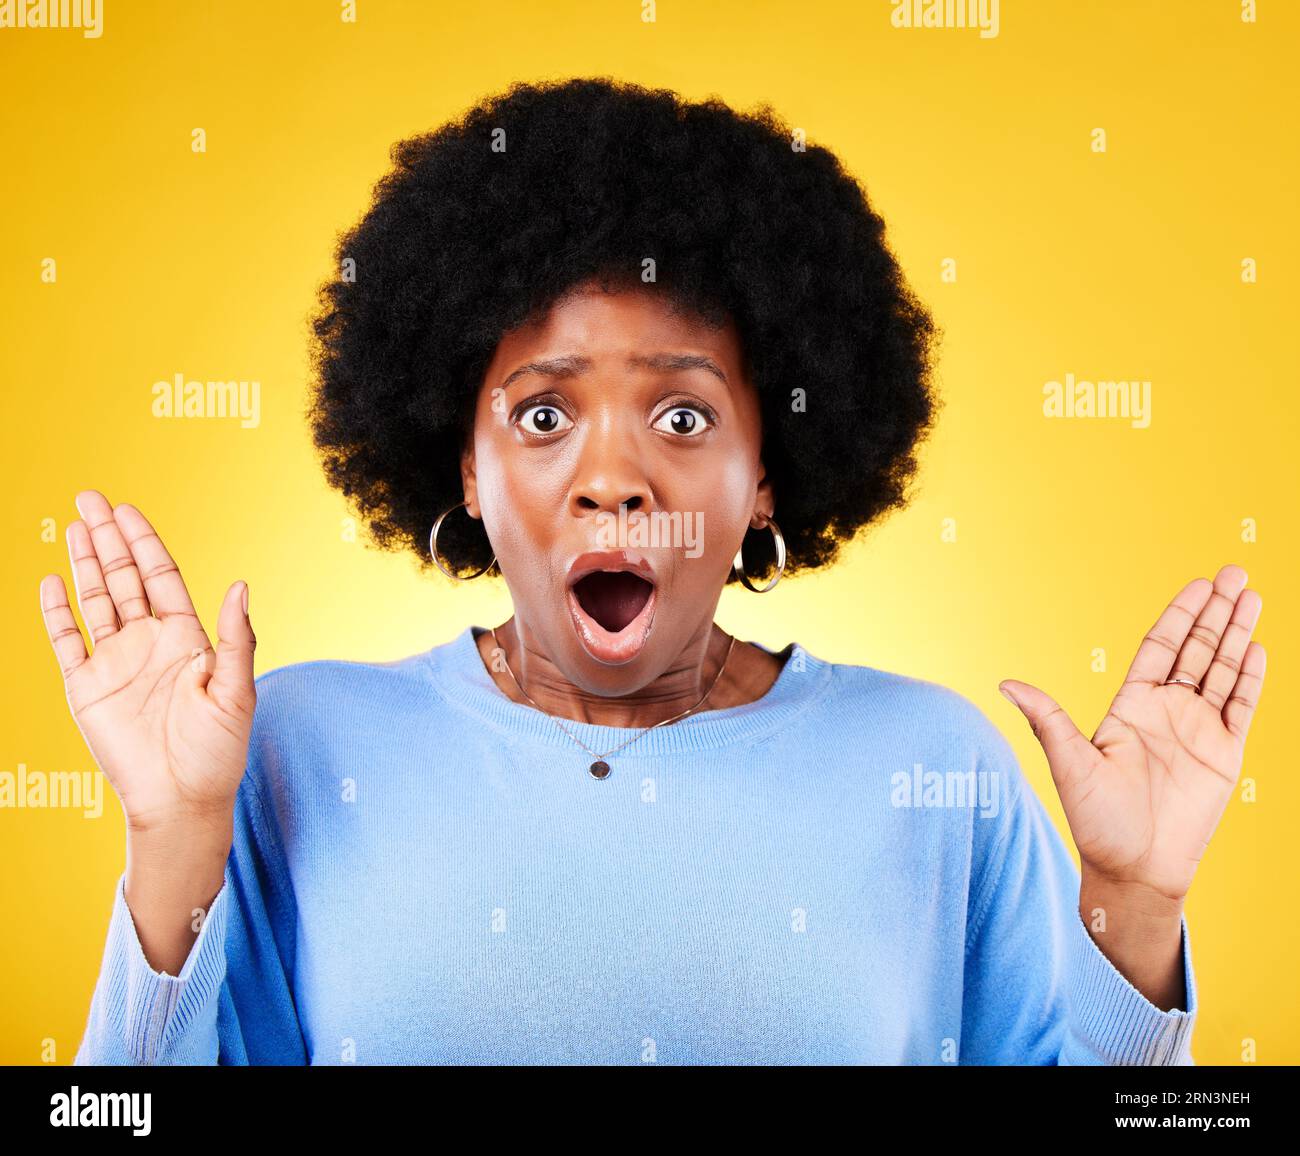 A scared or shocked face Stock Photo - Alamy